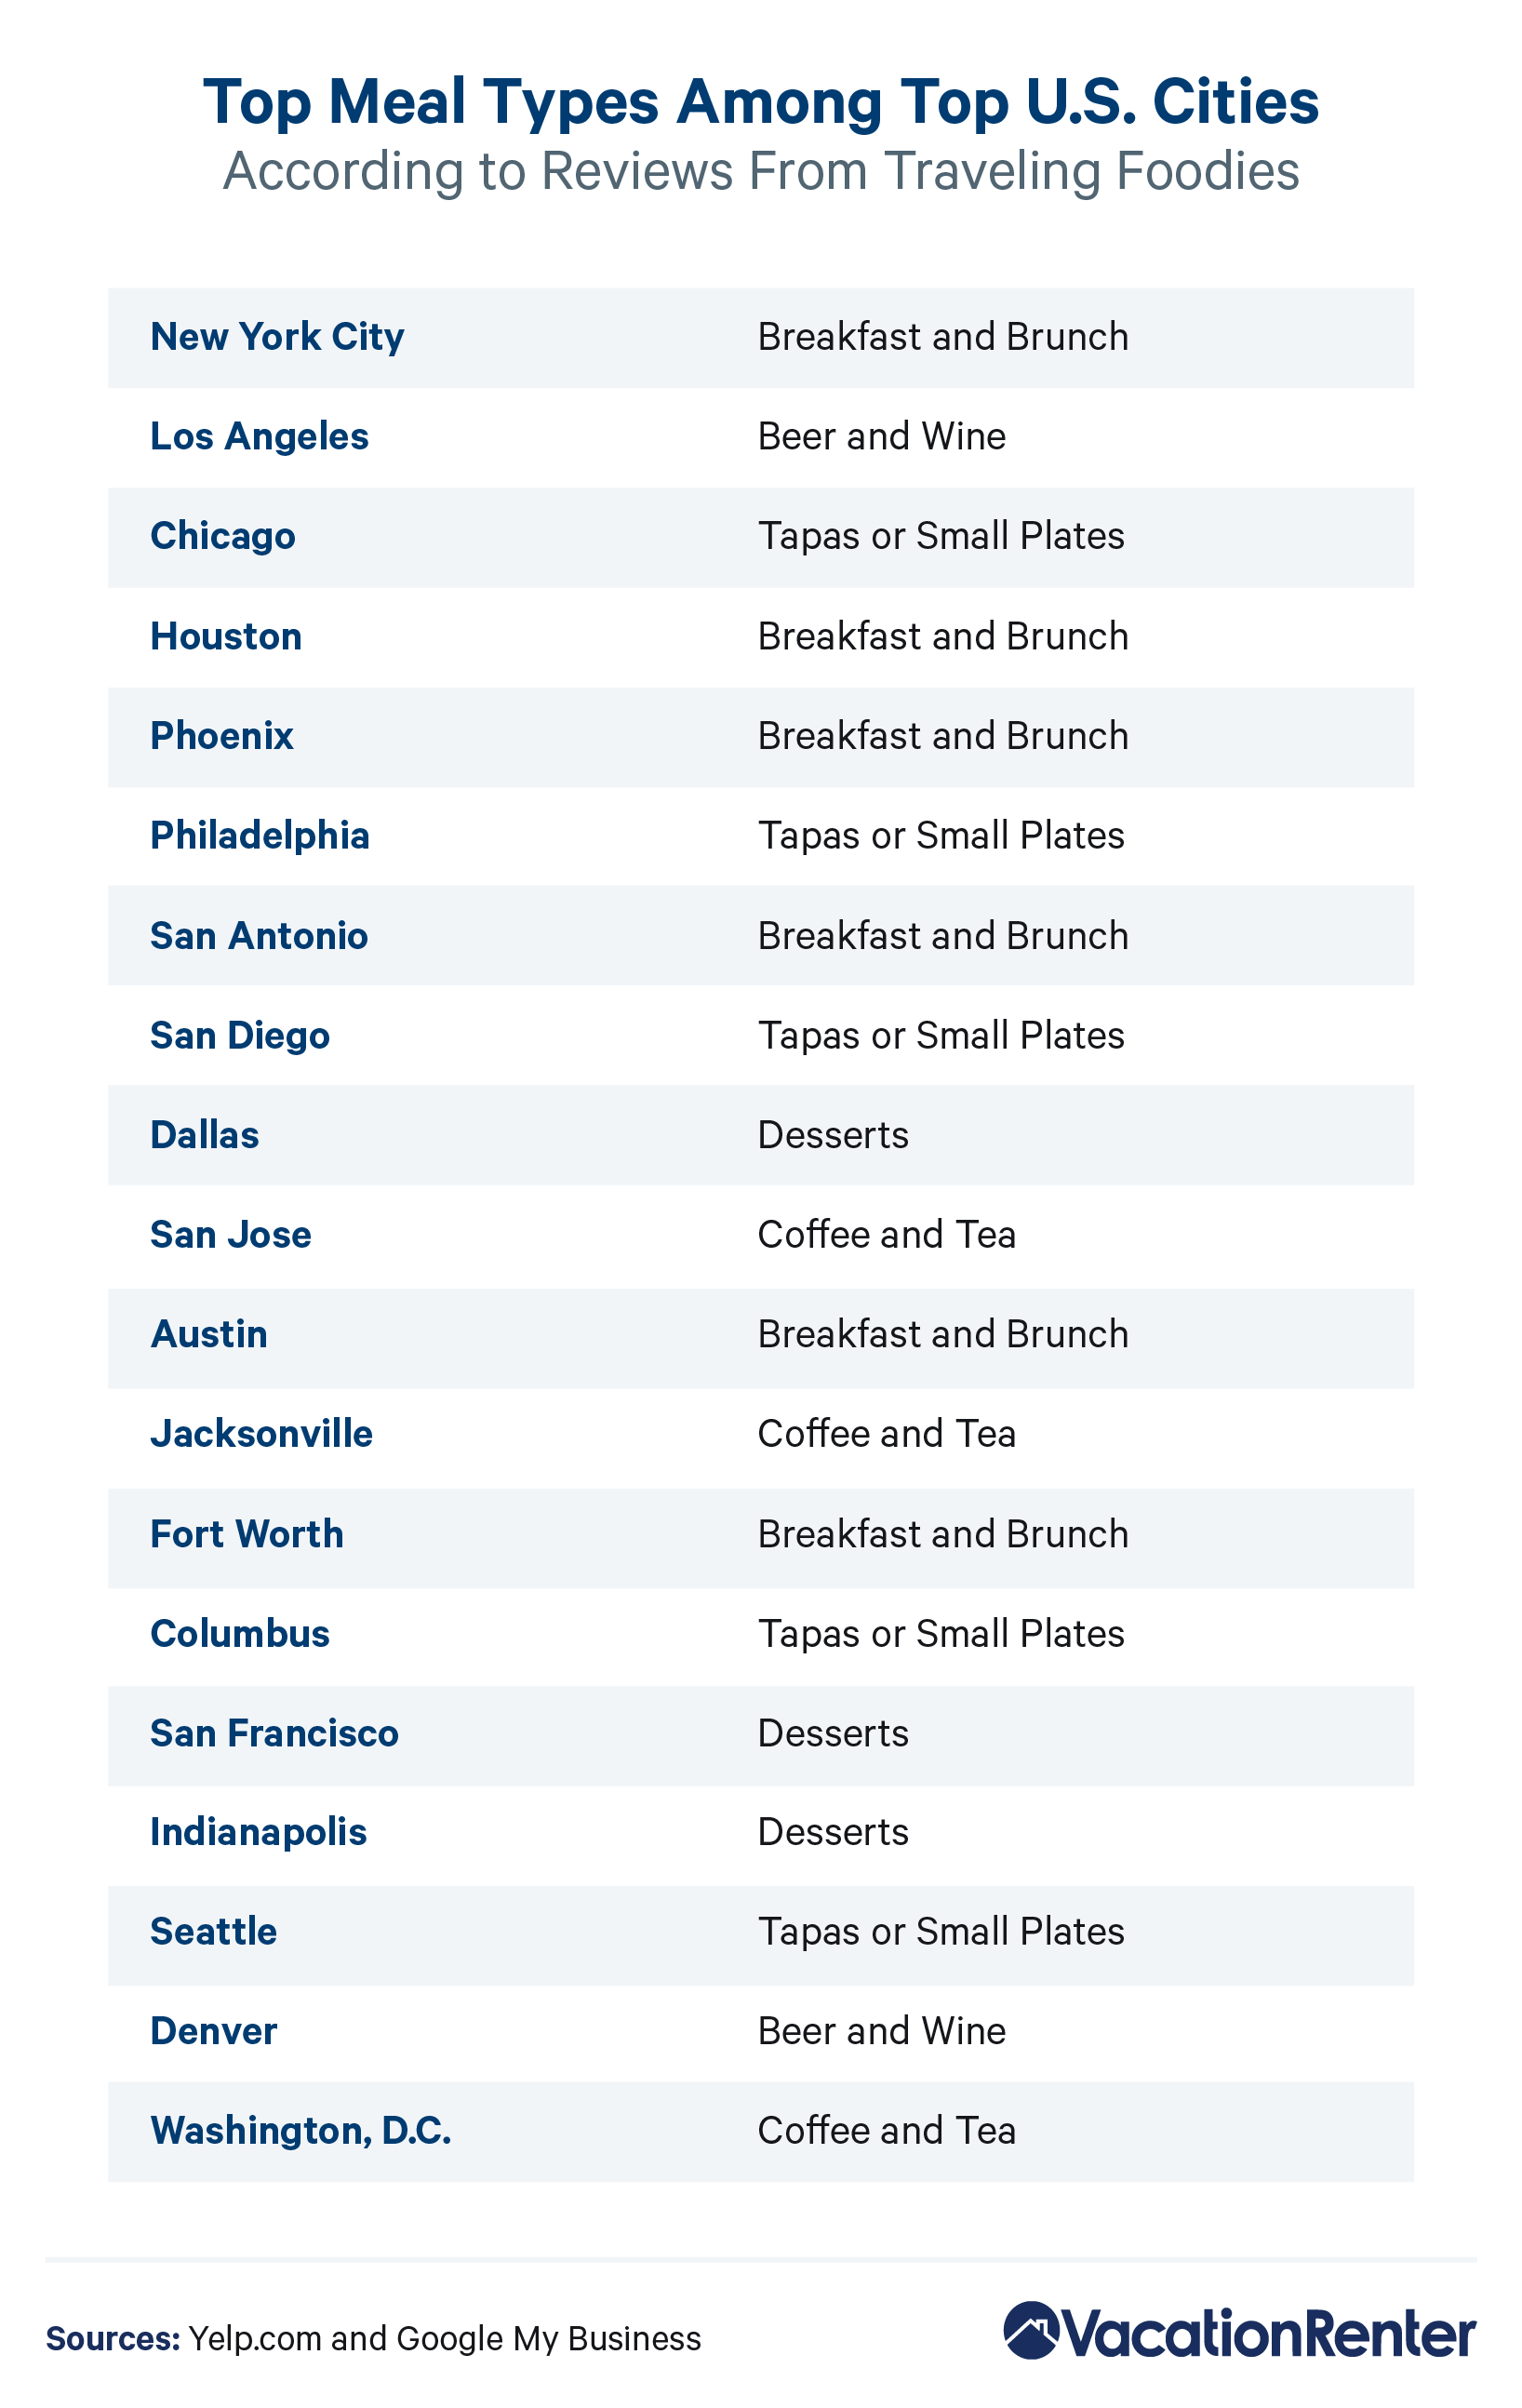 A list of the 20 most populous U.S. cities and their highest-rated meal types, according to traveling foodies